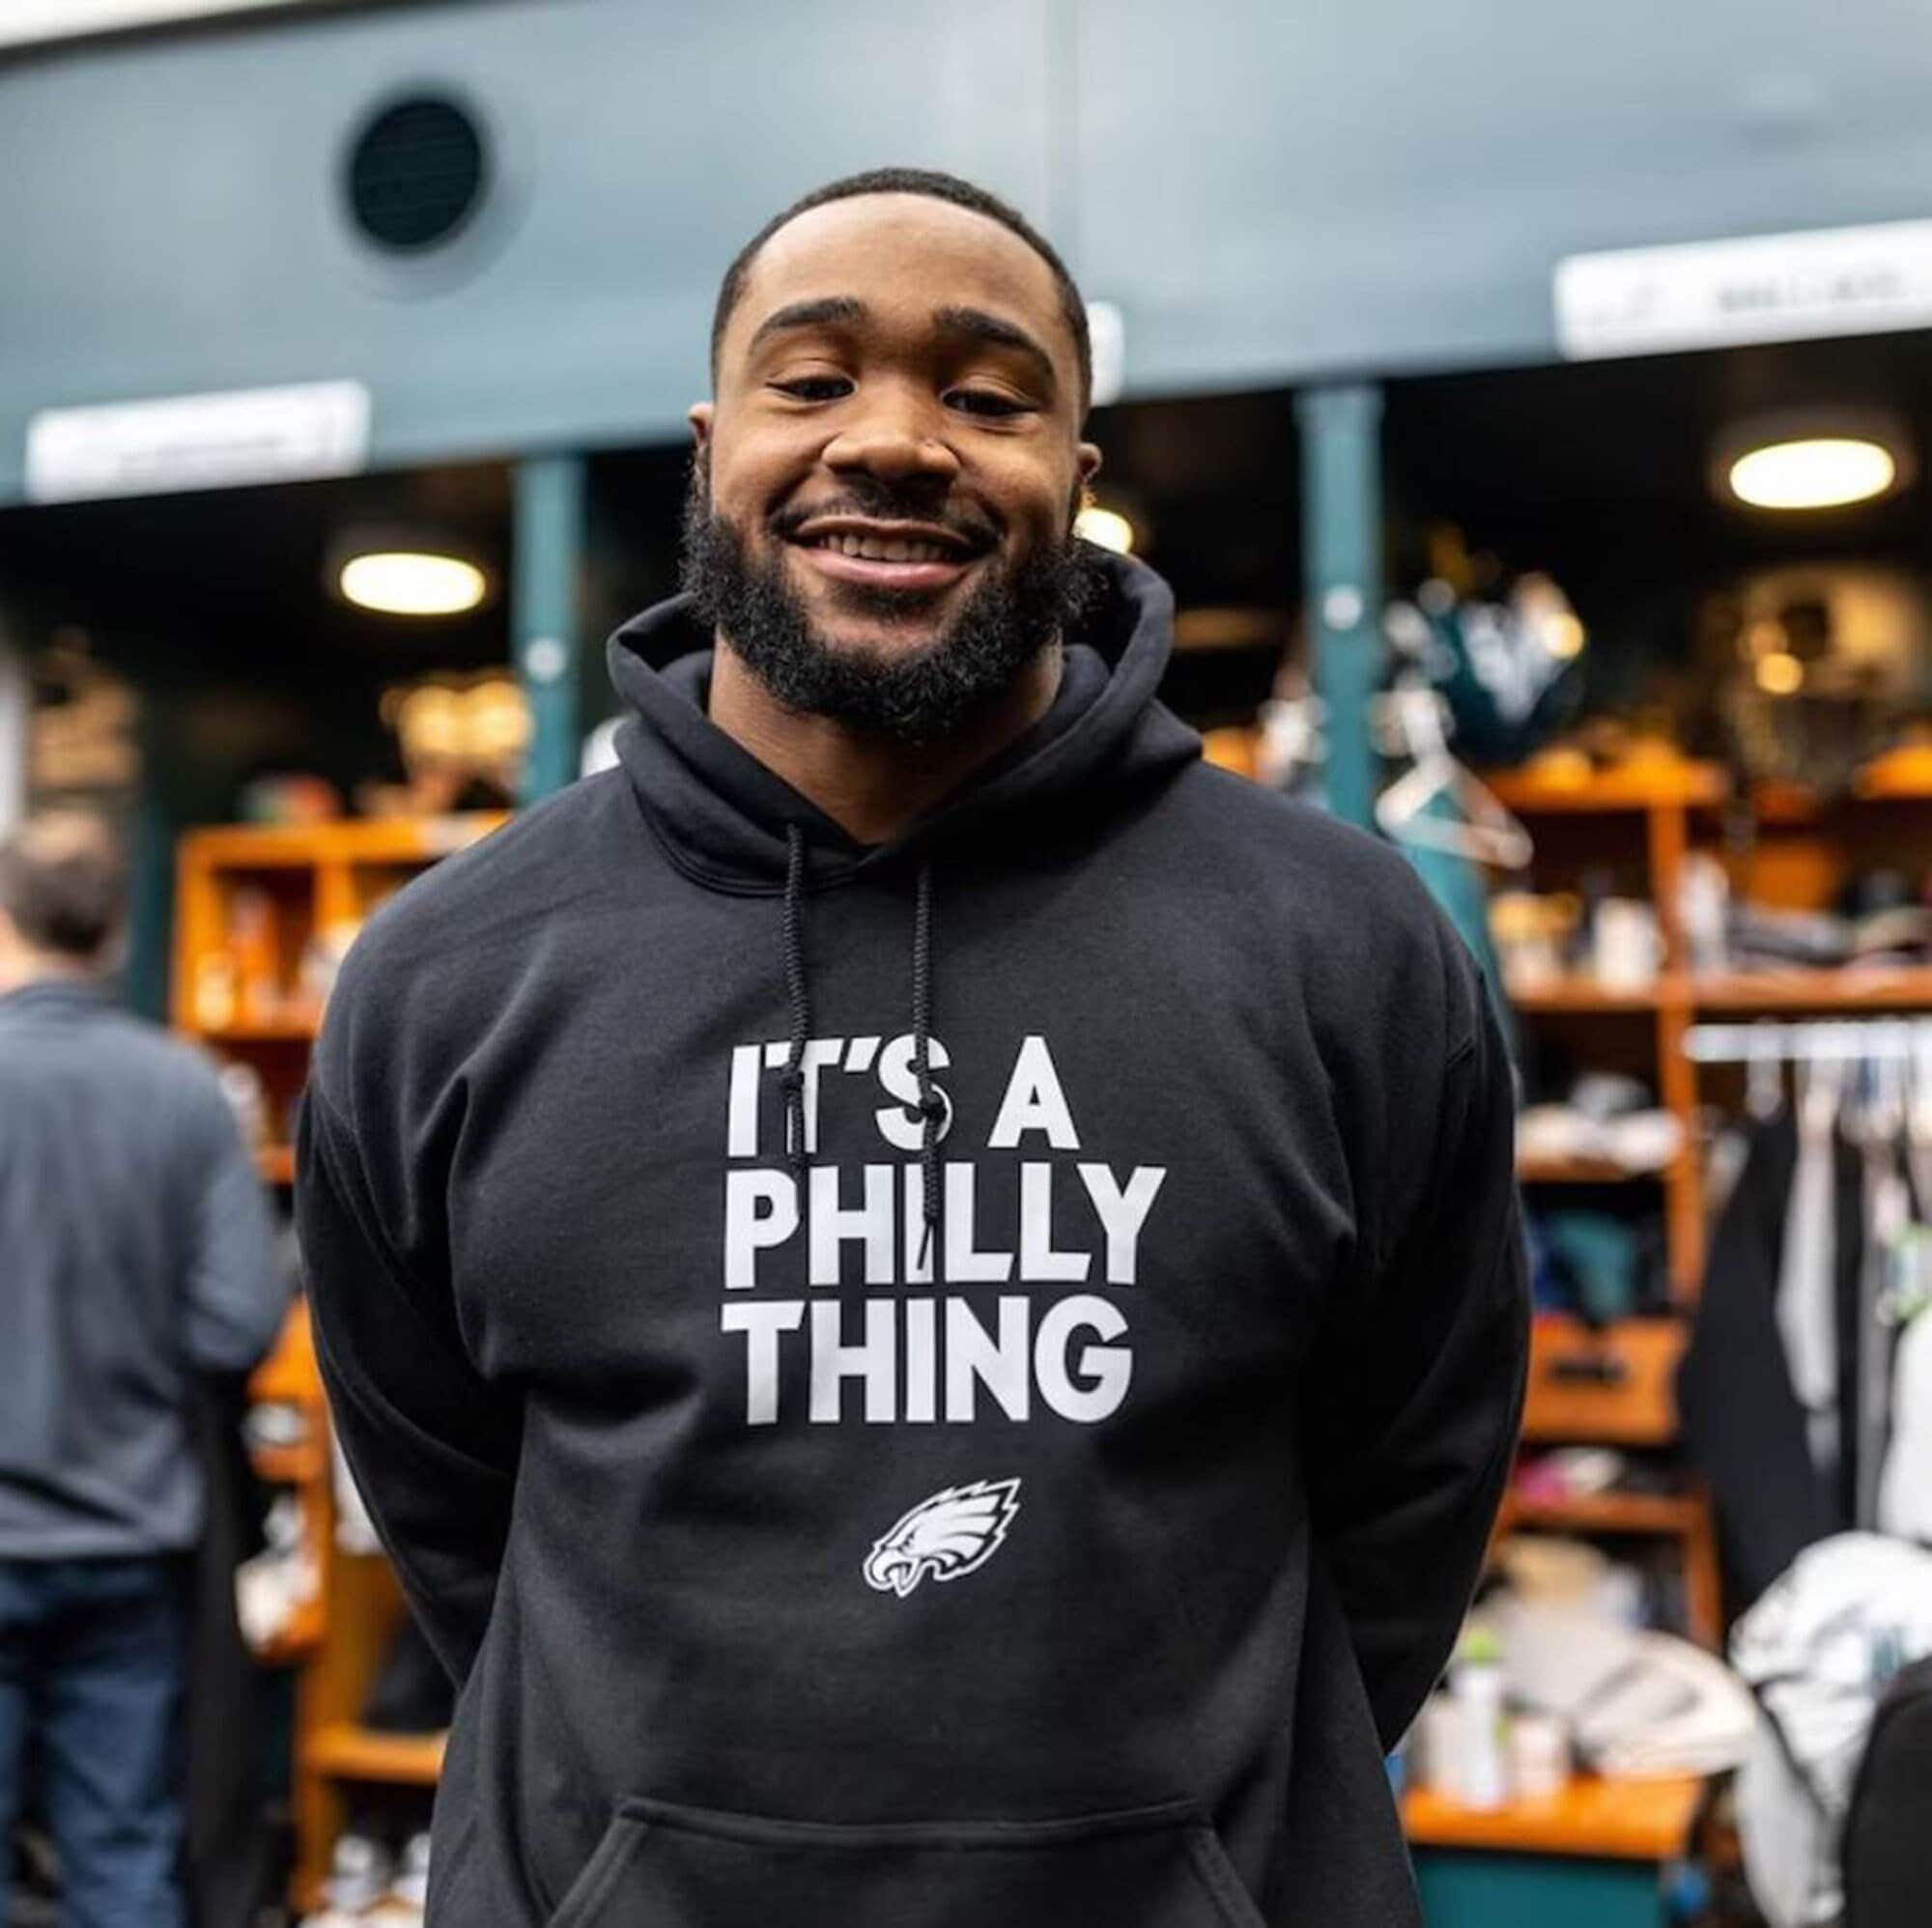 It's a Philly Thing Shirt, Sweatshirt, sweater and long sleeve Sweatshirt